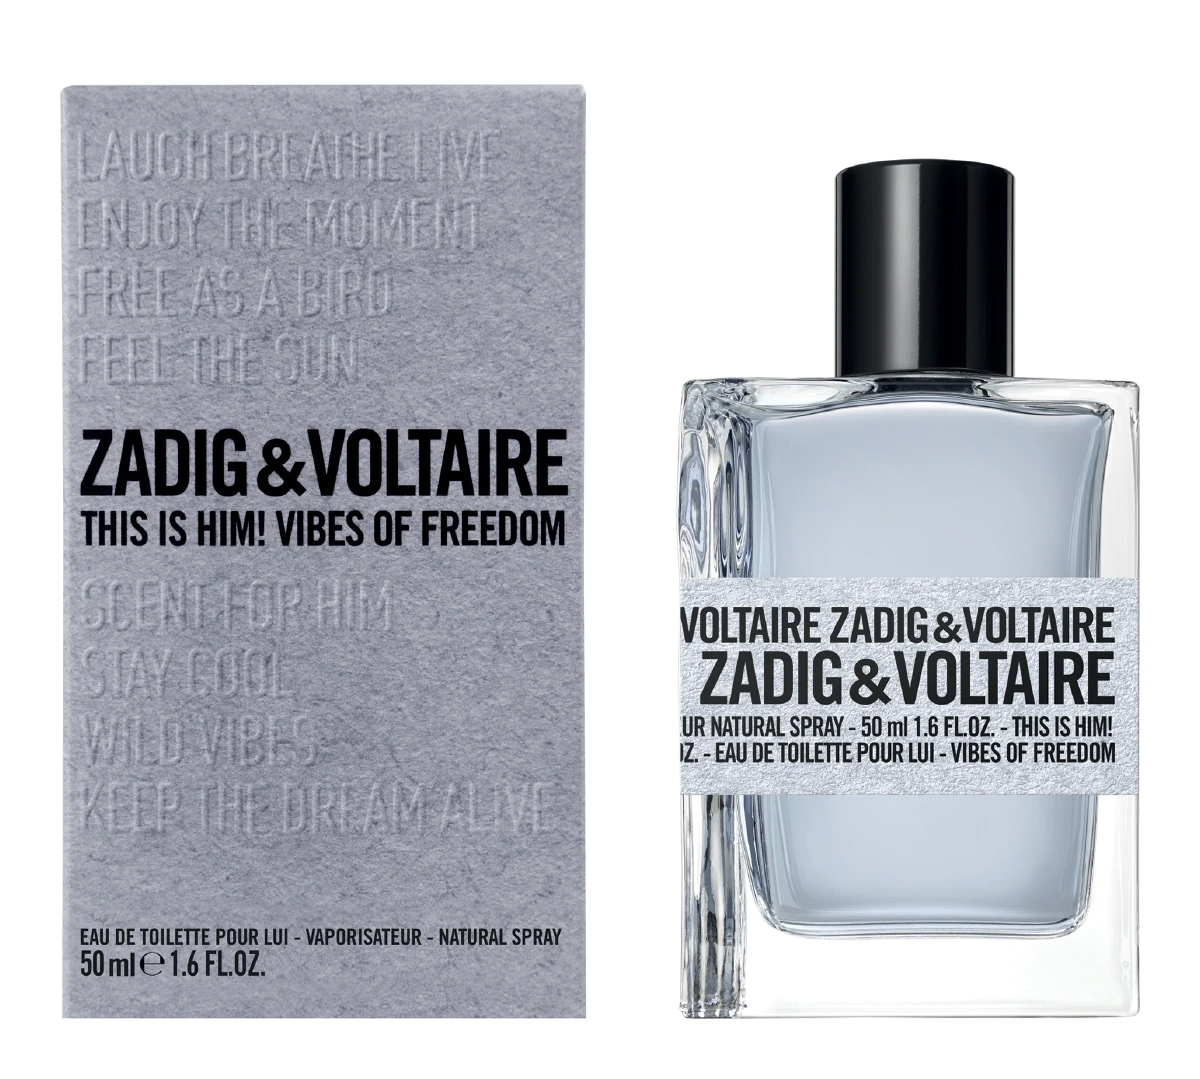 The Newest Zadig & Voltaire Vibes Of Freedom Duo ~ New Fragrances